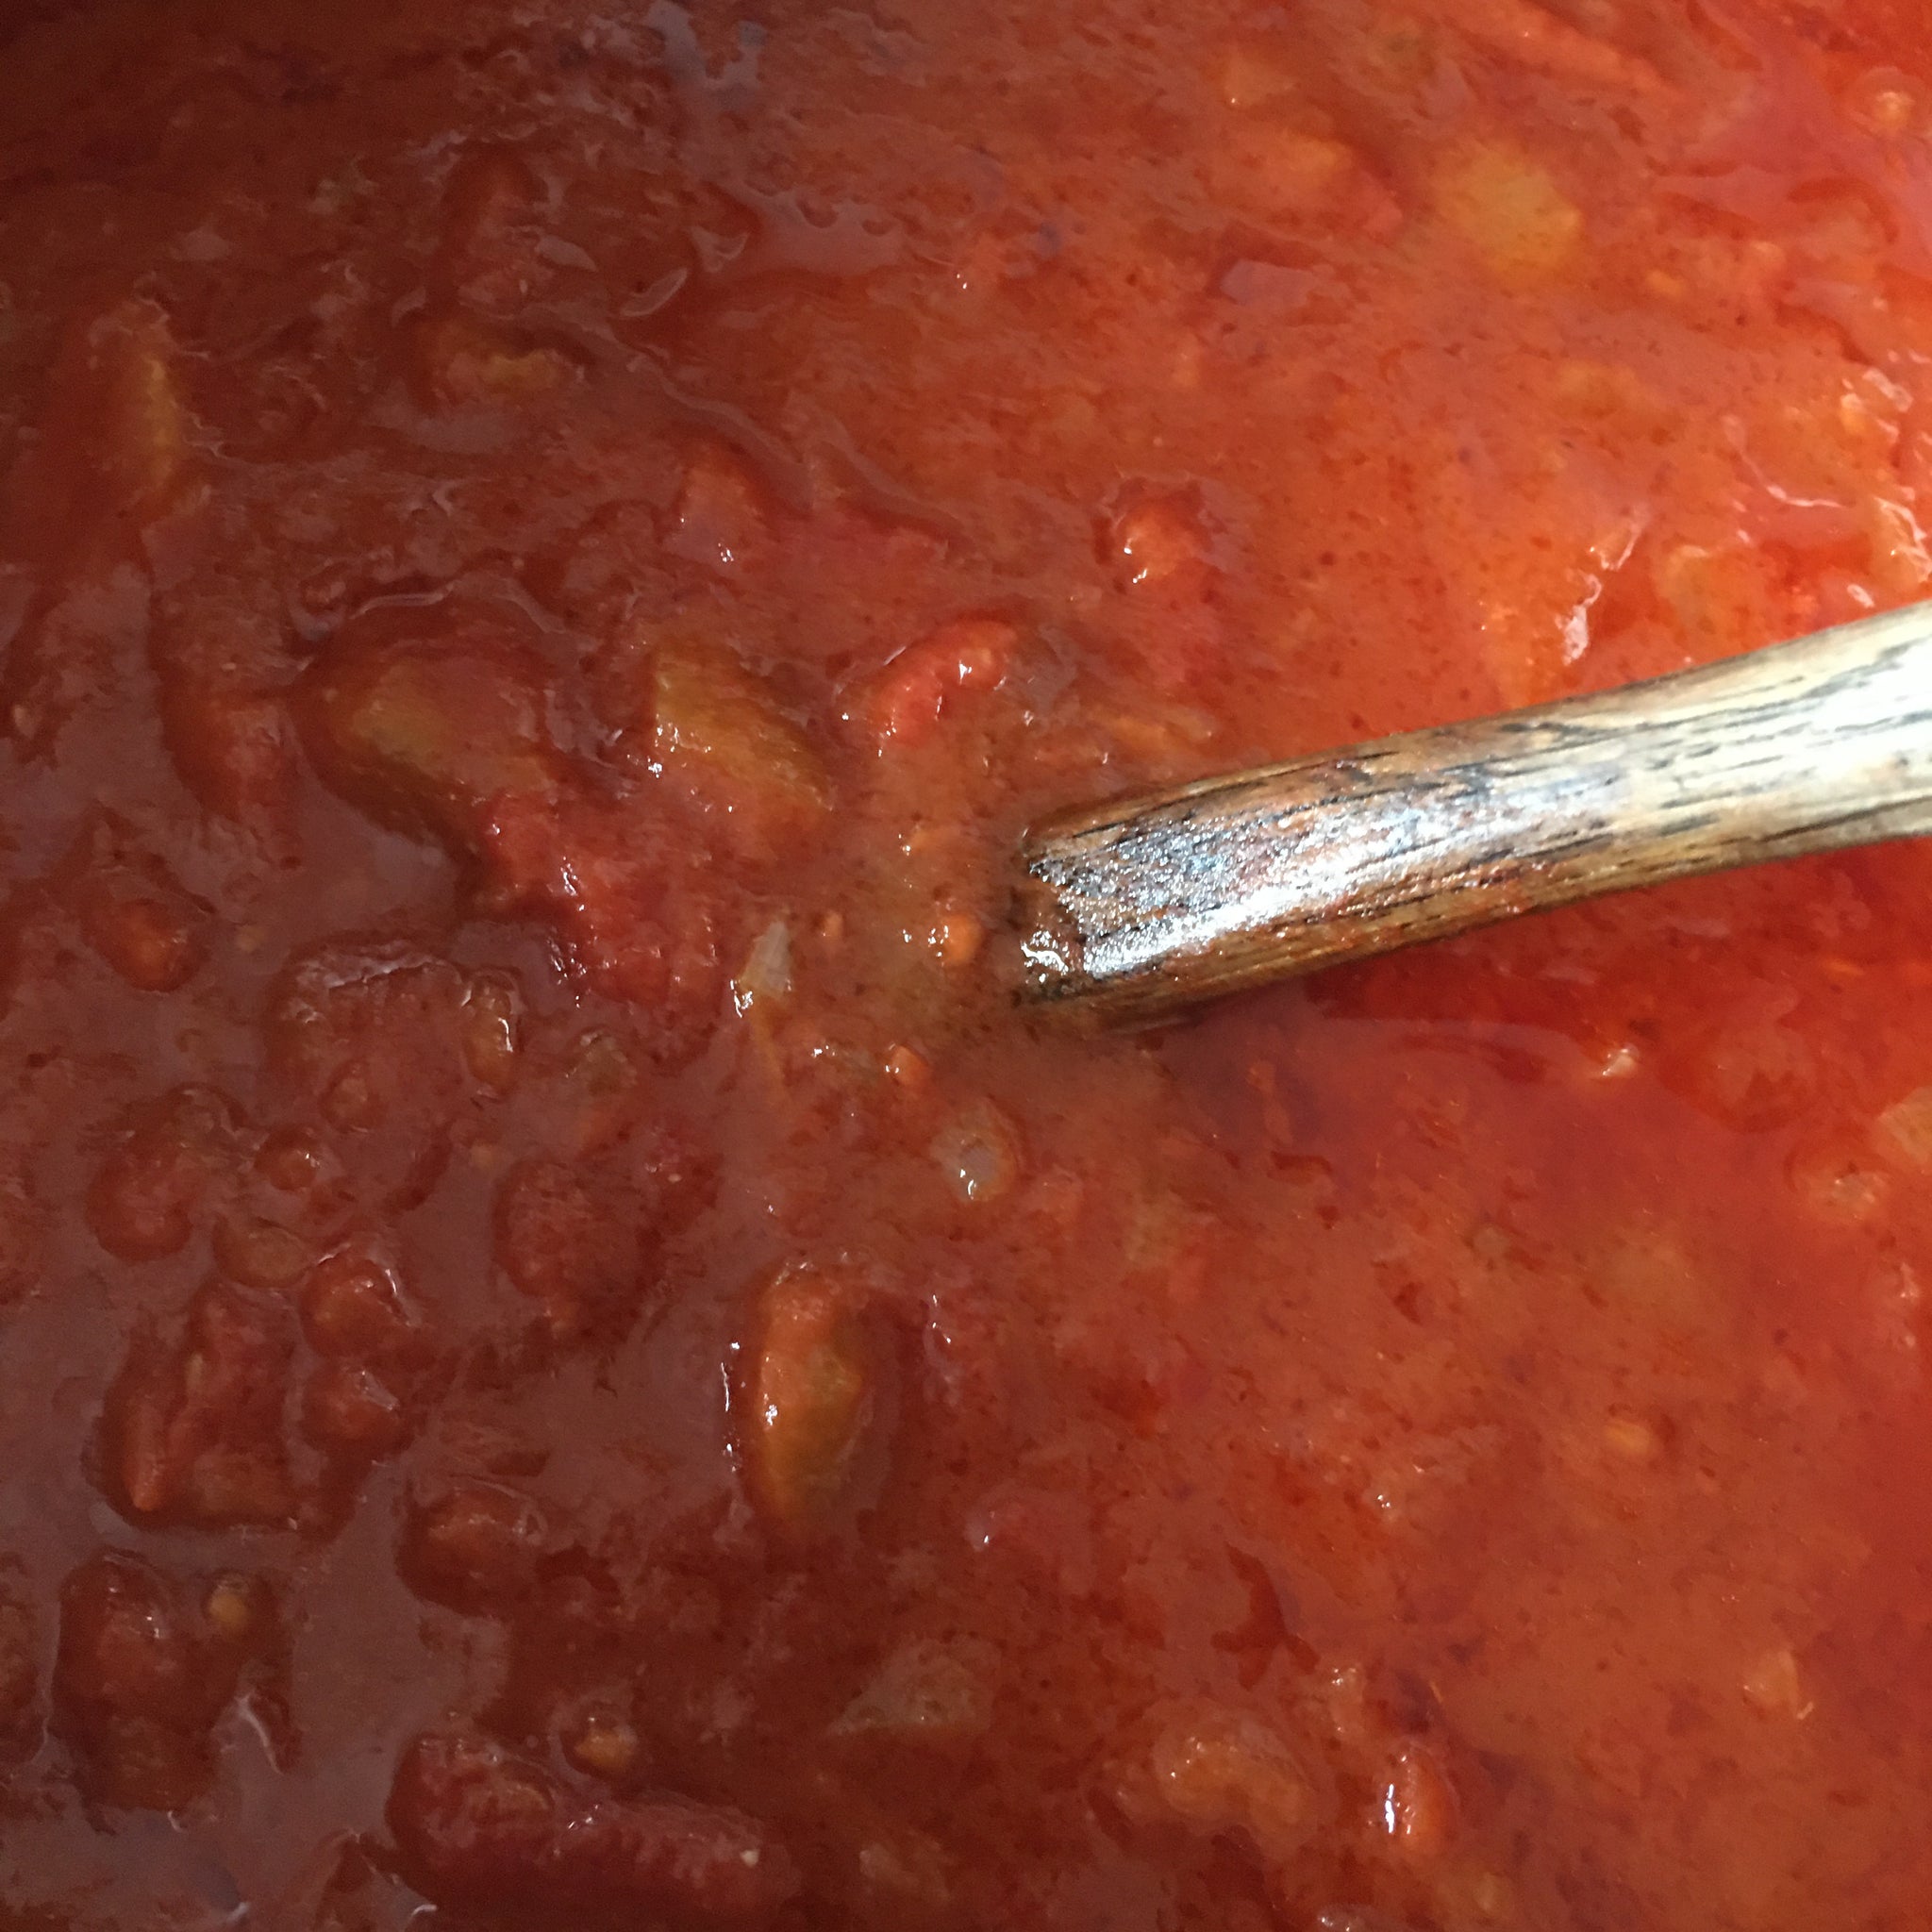 The best EVER tomato sauce